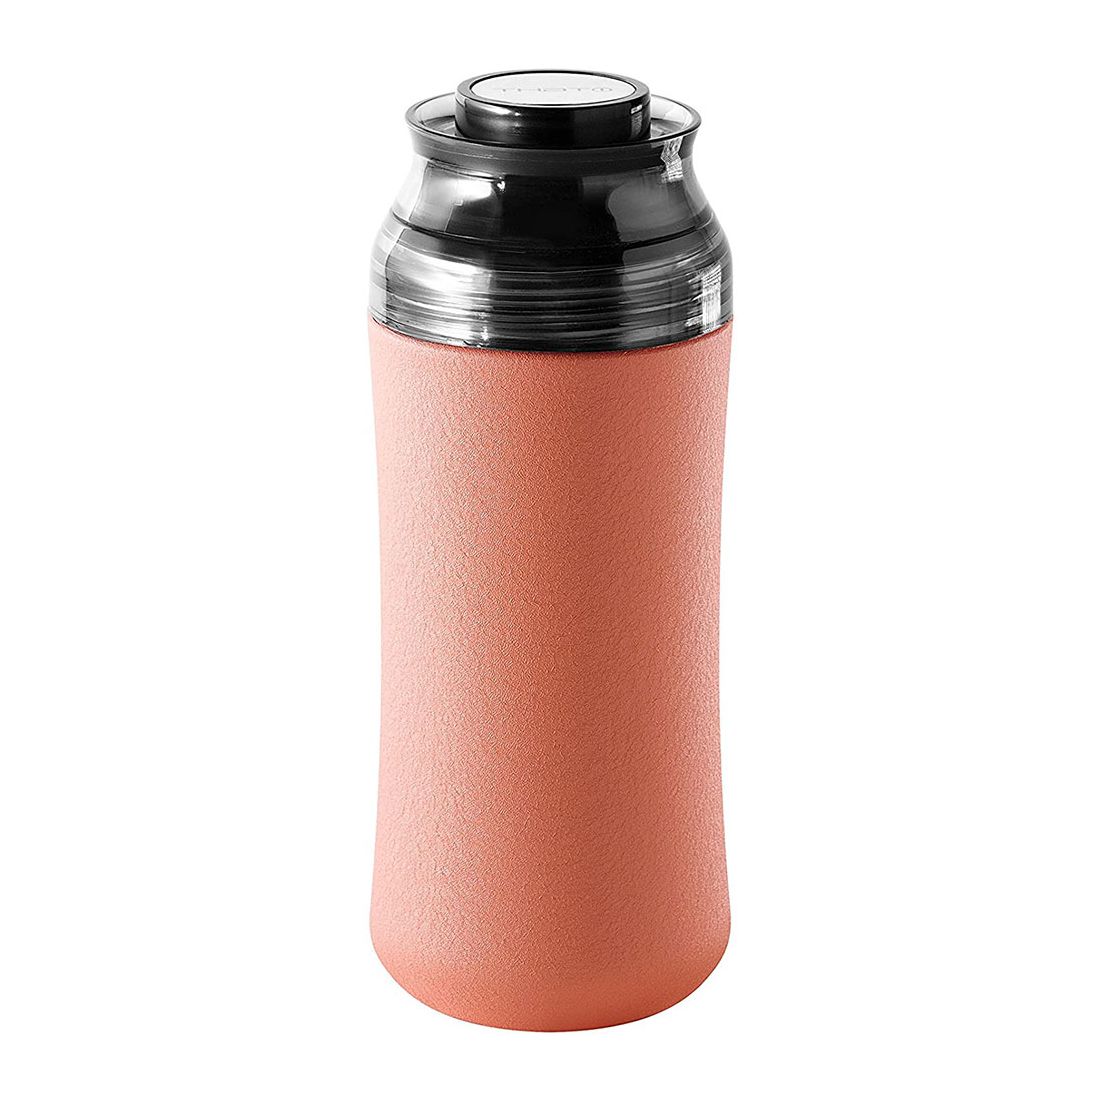 That! Therma Ministor Tumbler Coral Pink 240ml